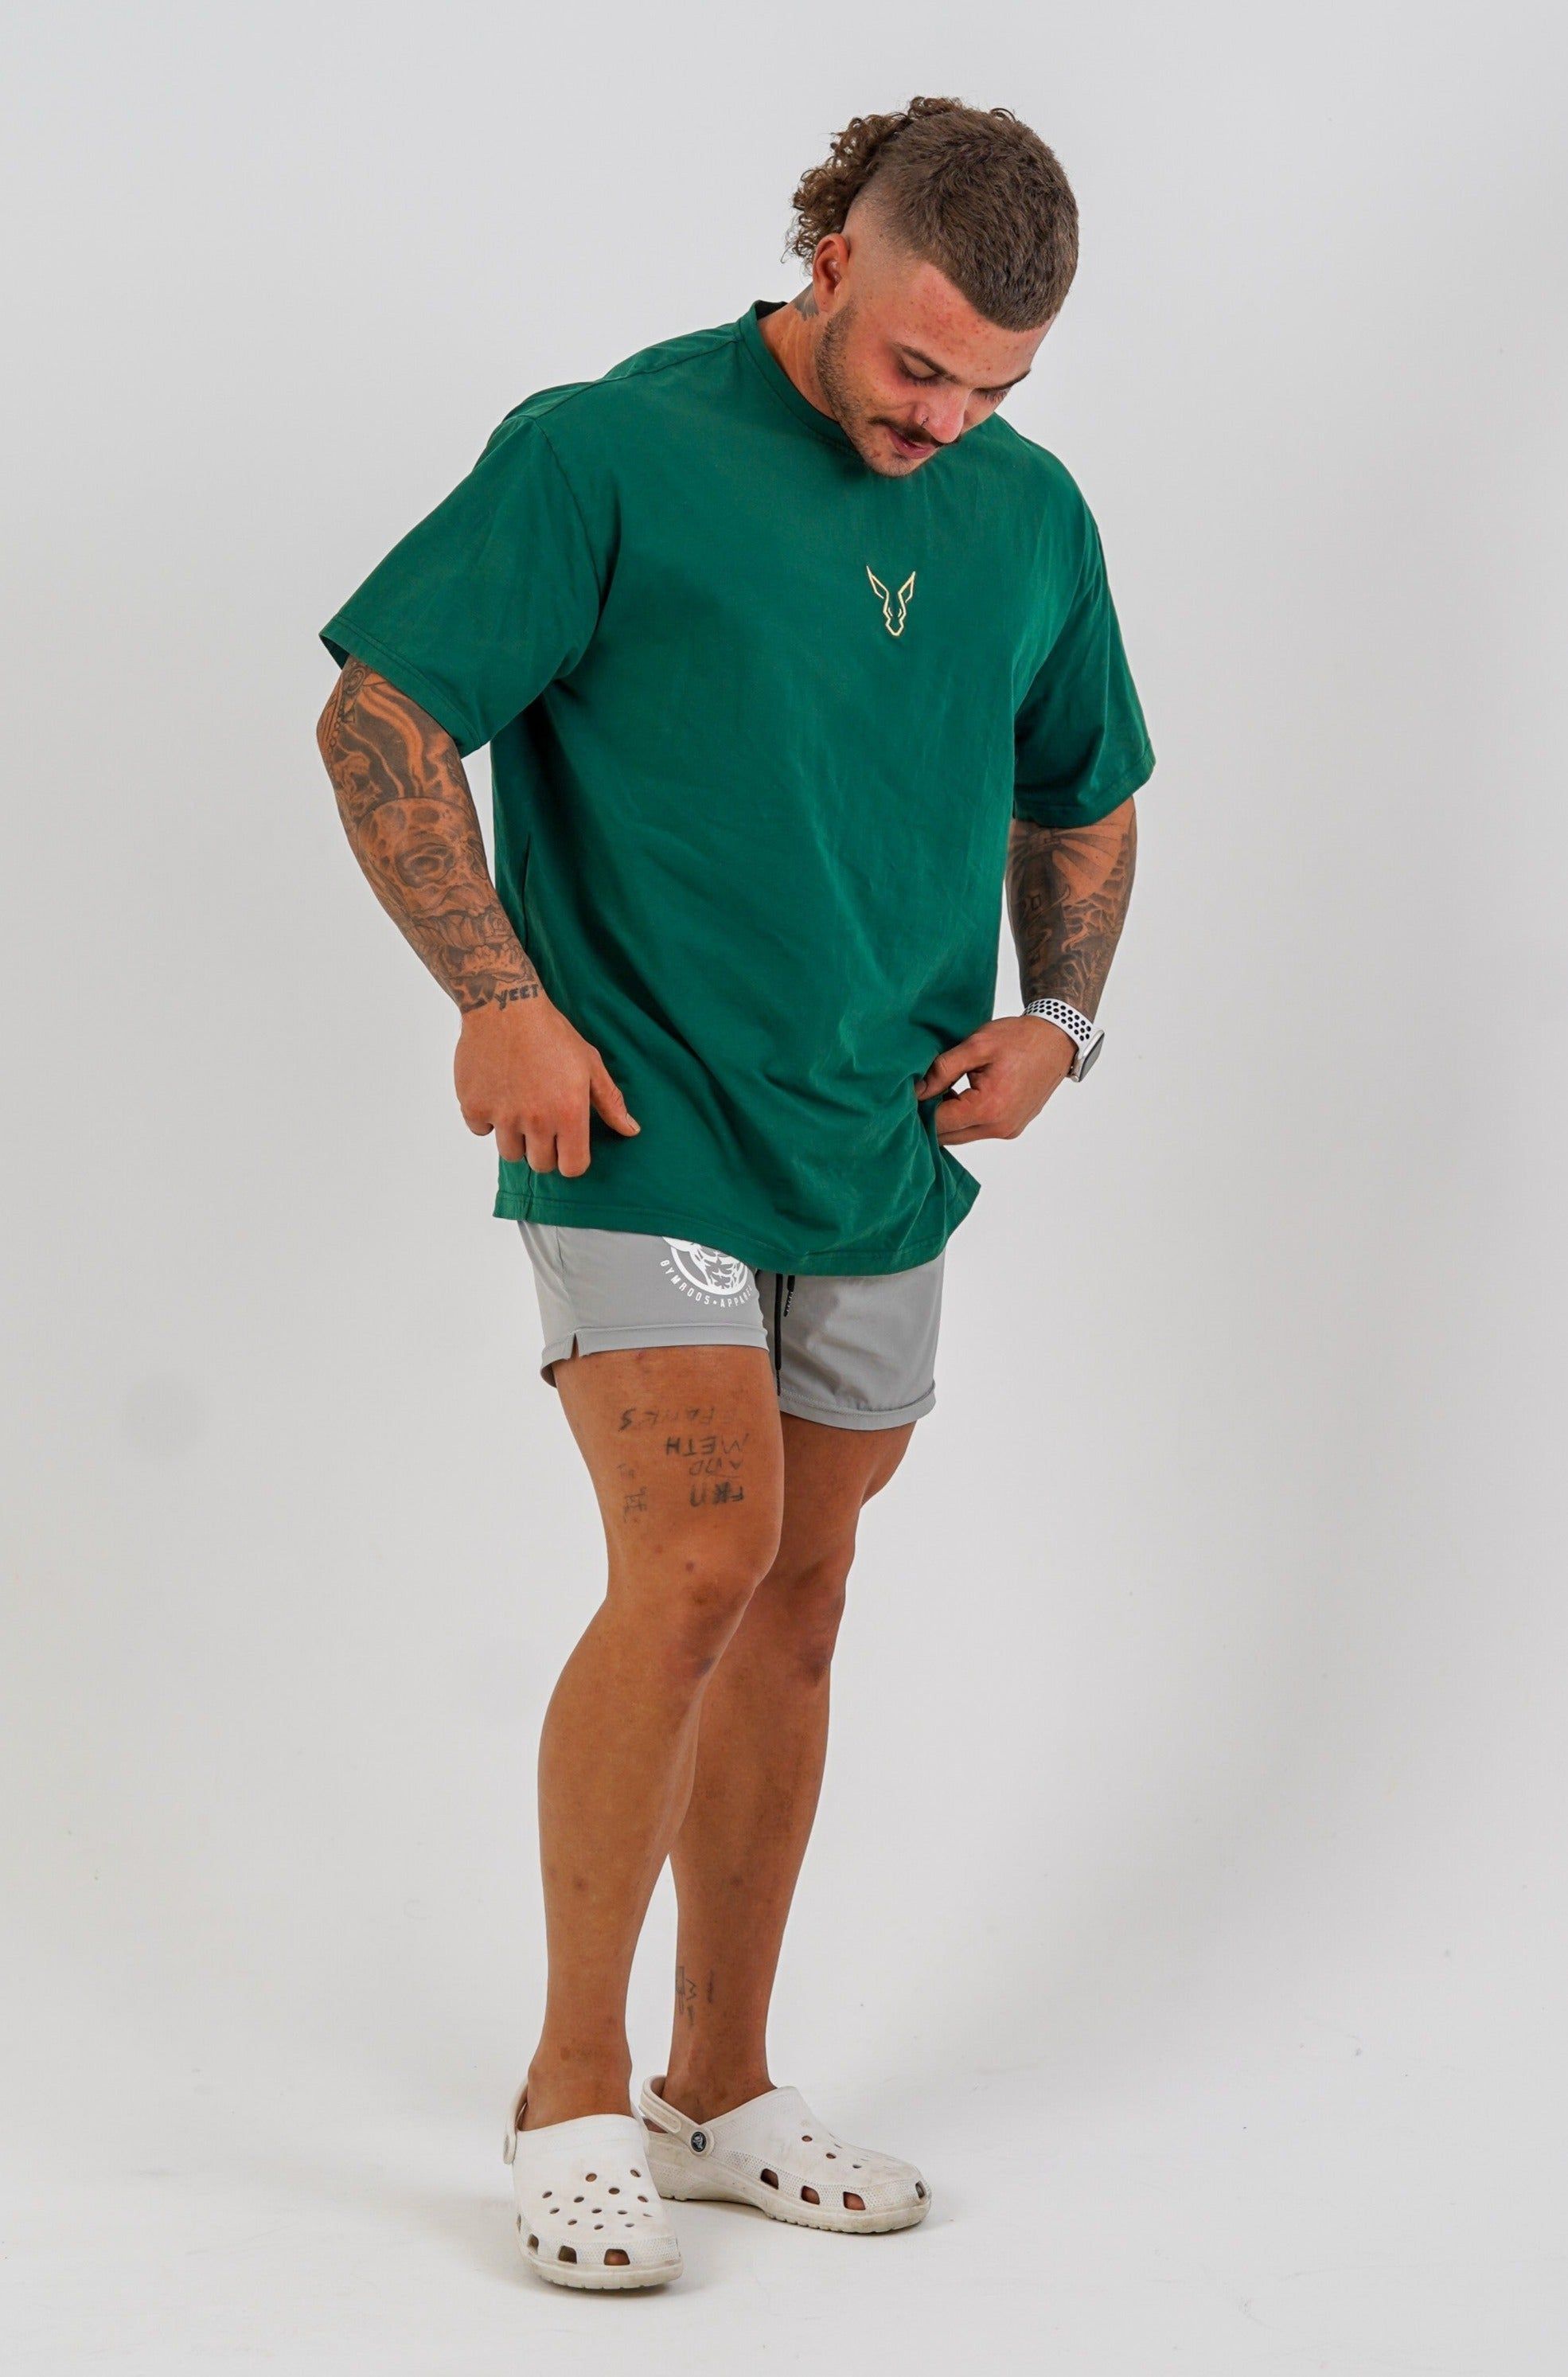 Erupt Oversized Tee - Green & Gold - GYMROOS